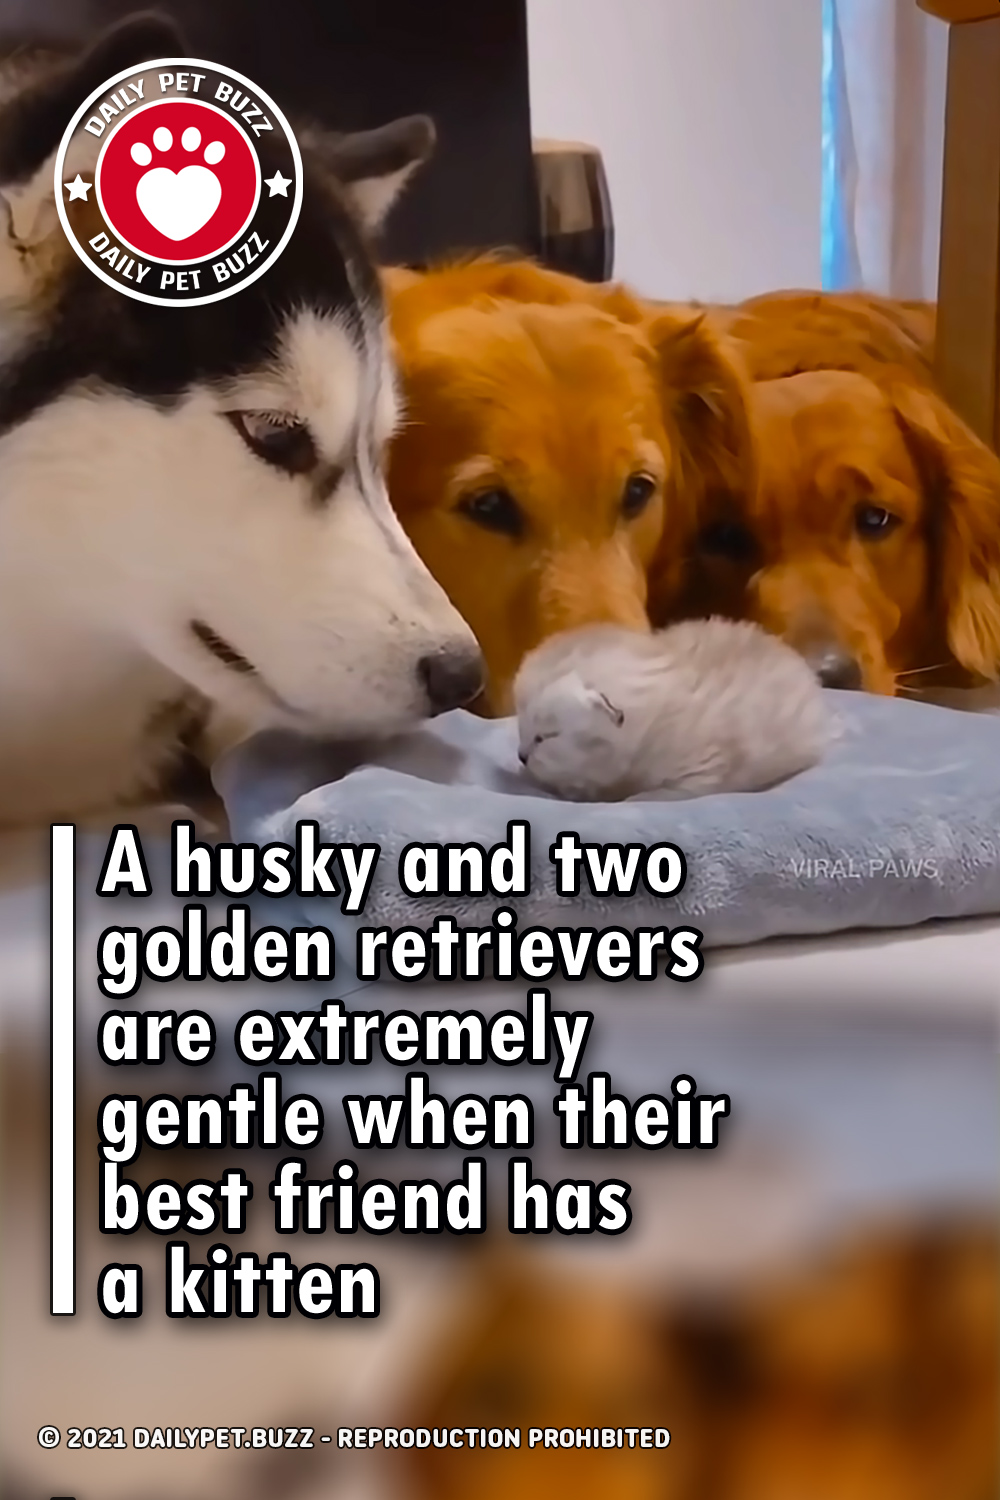 A husky and two golden retrievers are extremely gentle when their best friend has a kitten